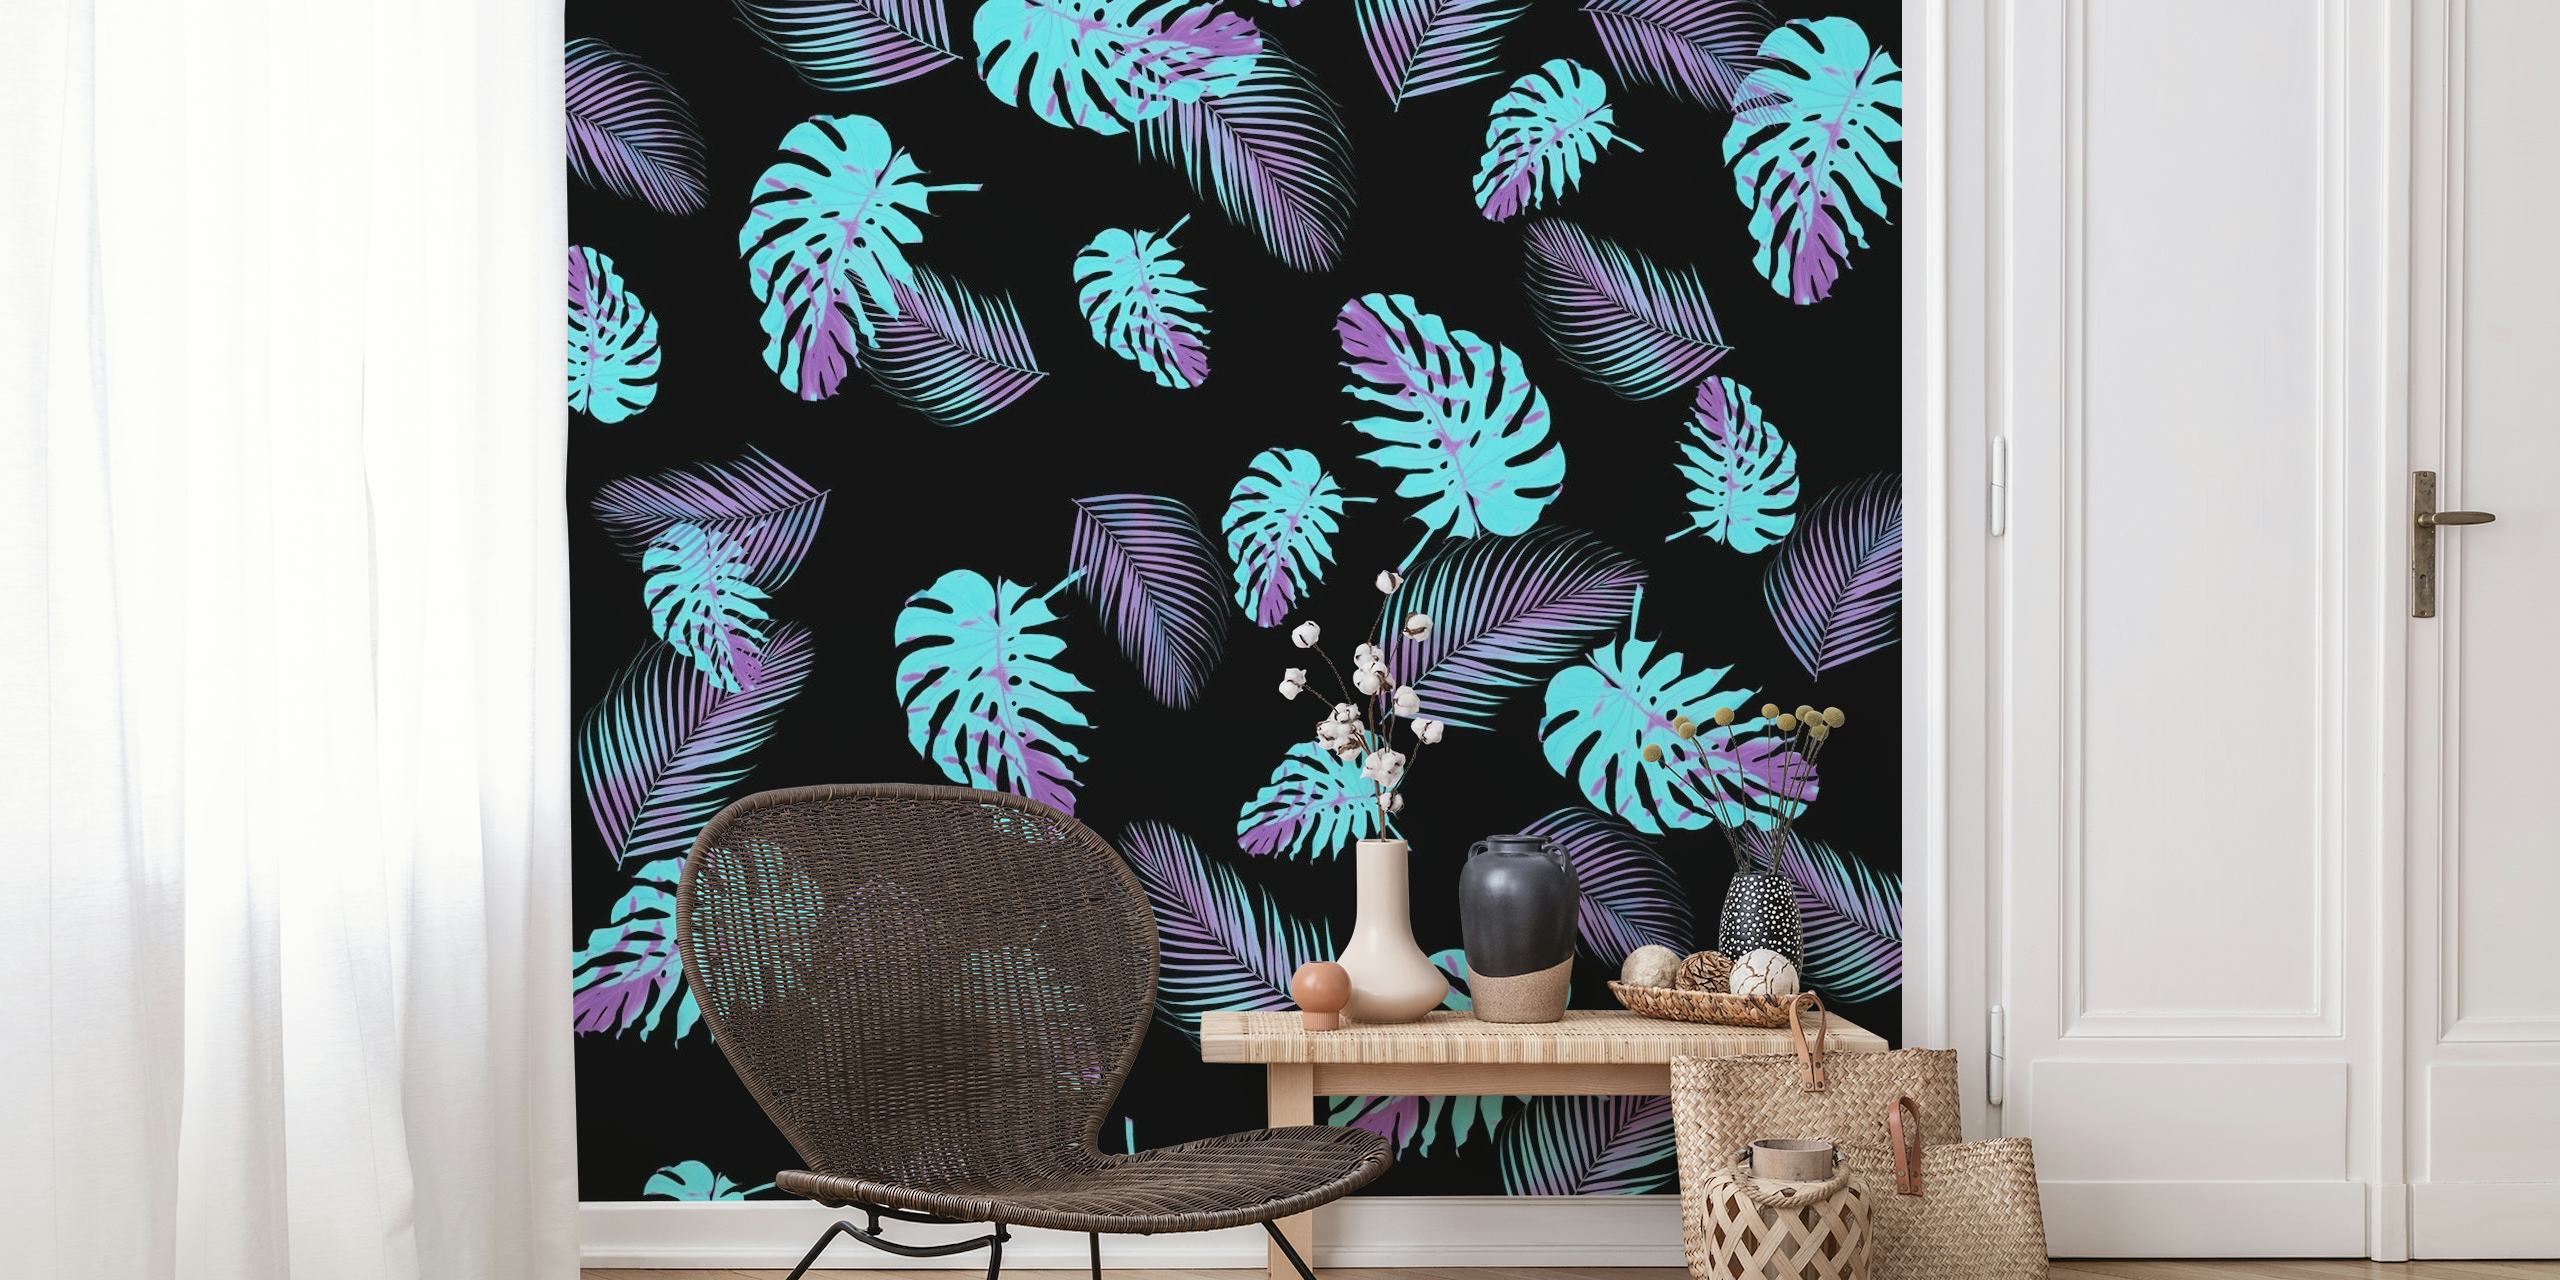 Turquoise monstera leaves pattern on a black background wall mural